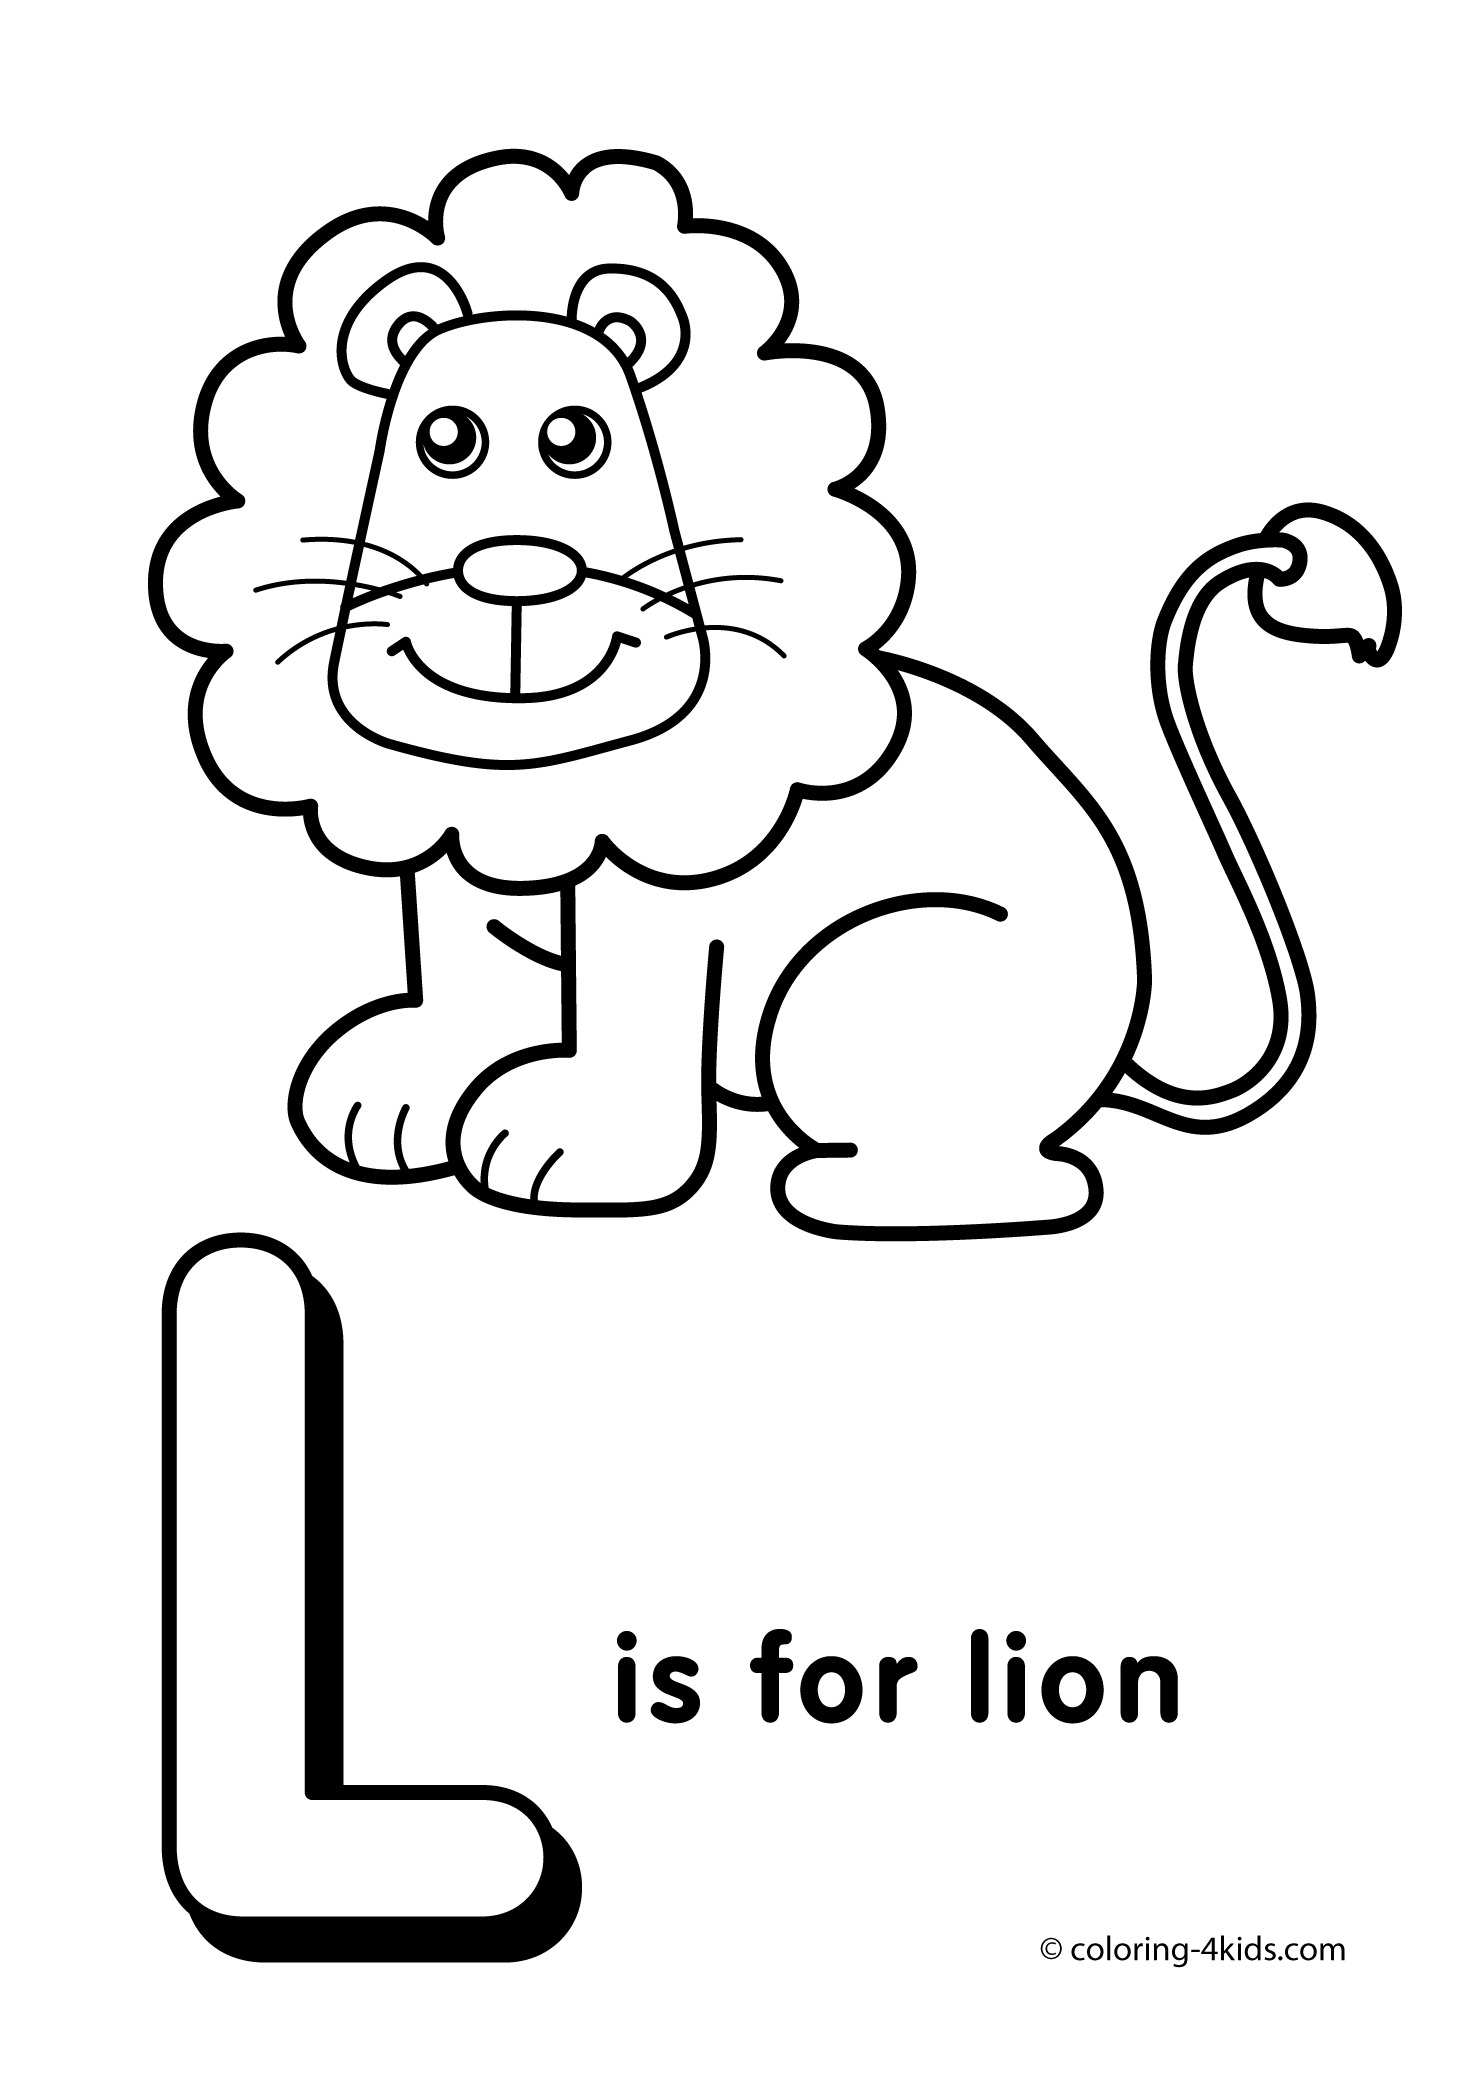 Free Coloring Pages Letter L - Coloring Home